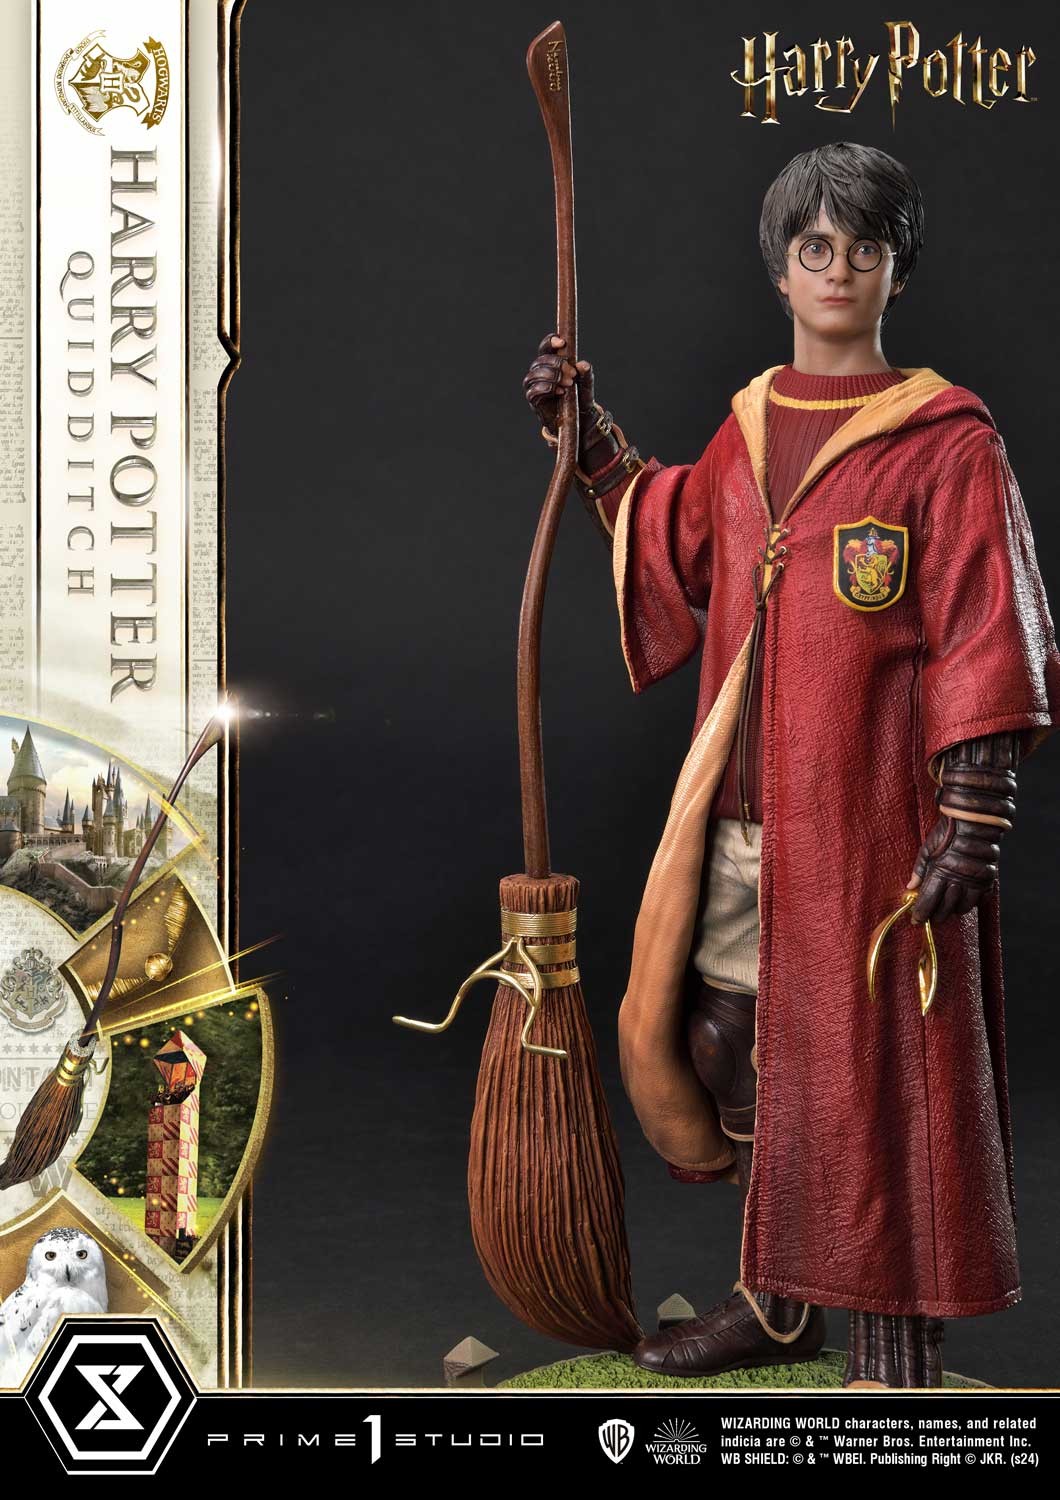 Harry Potter (Quidditch Edition) (Prototype Shown) View 20